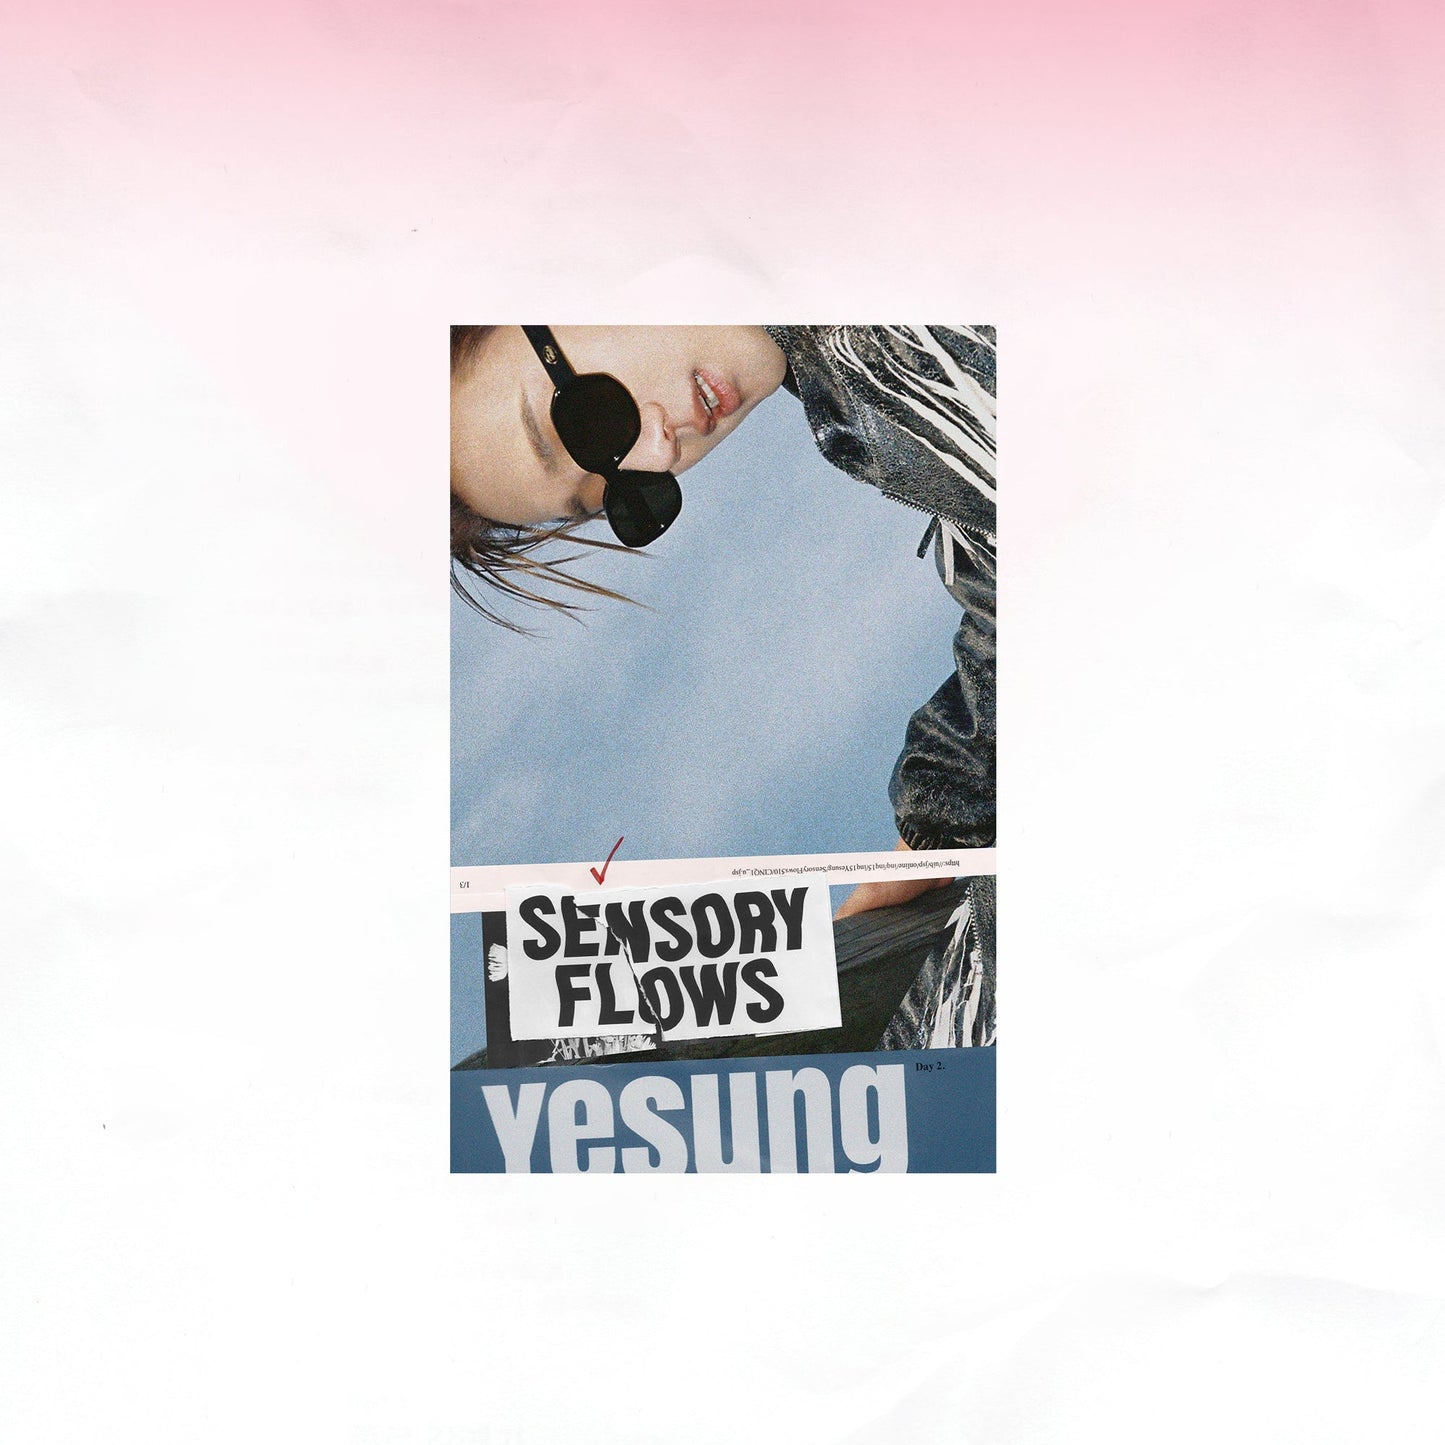 YESUNG (SUPER JUNIOR) 1ST ALBUM 'SENSORY FLOWS' DAY.2 VERSION COVER